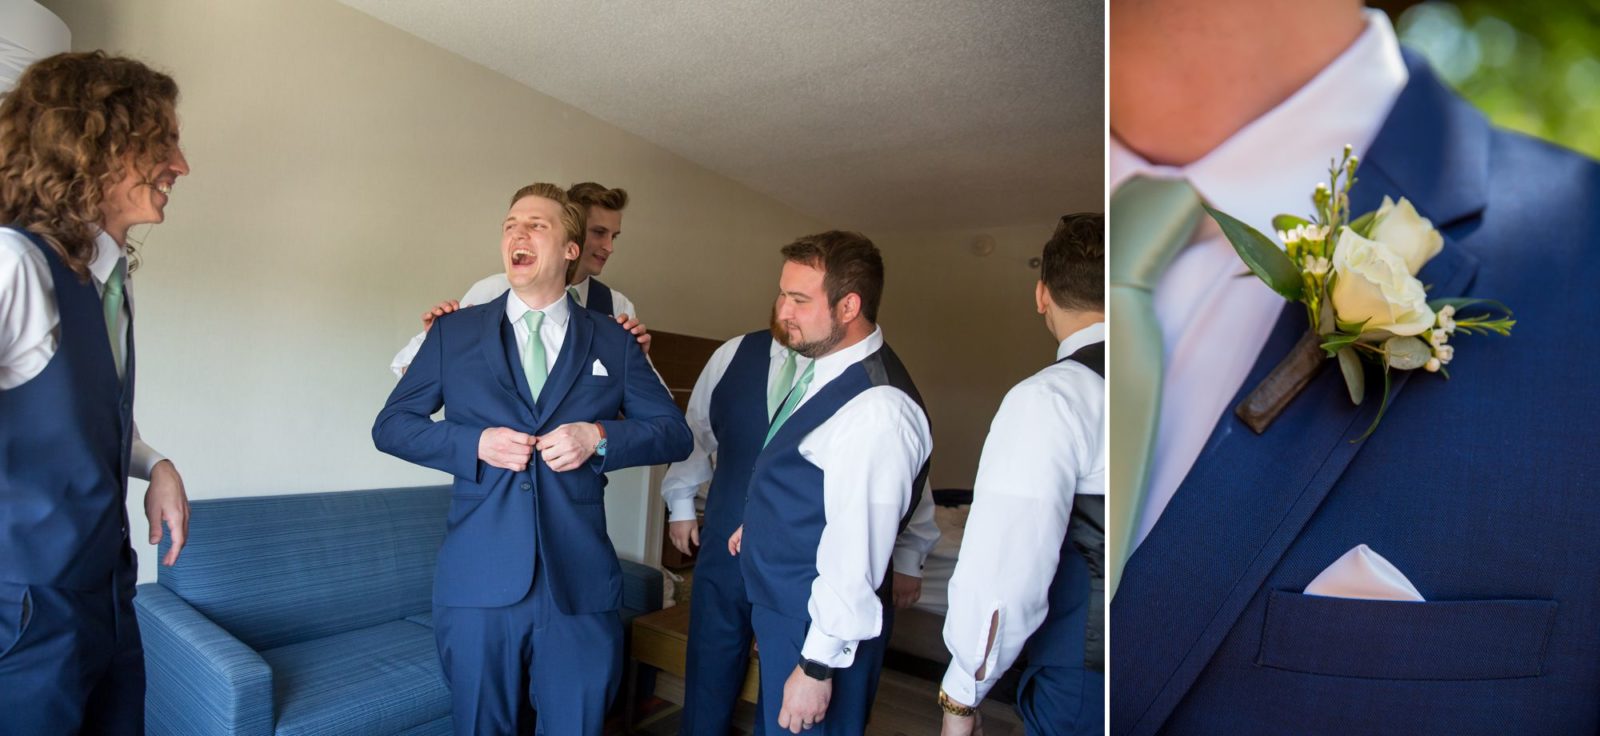 Groomsmen getting ready wearing navy blue tuxedos and green ties.